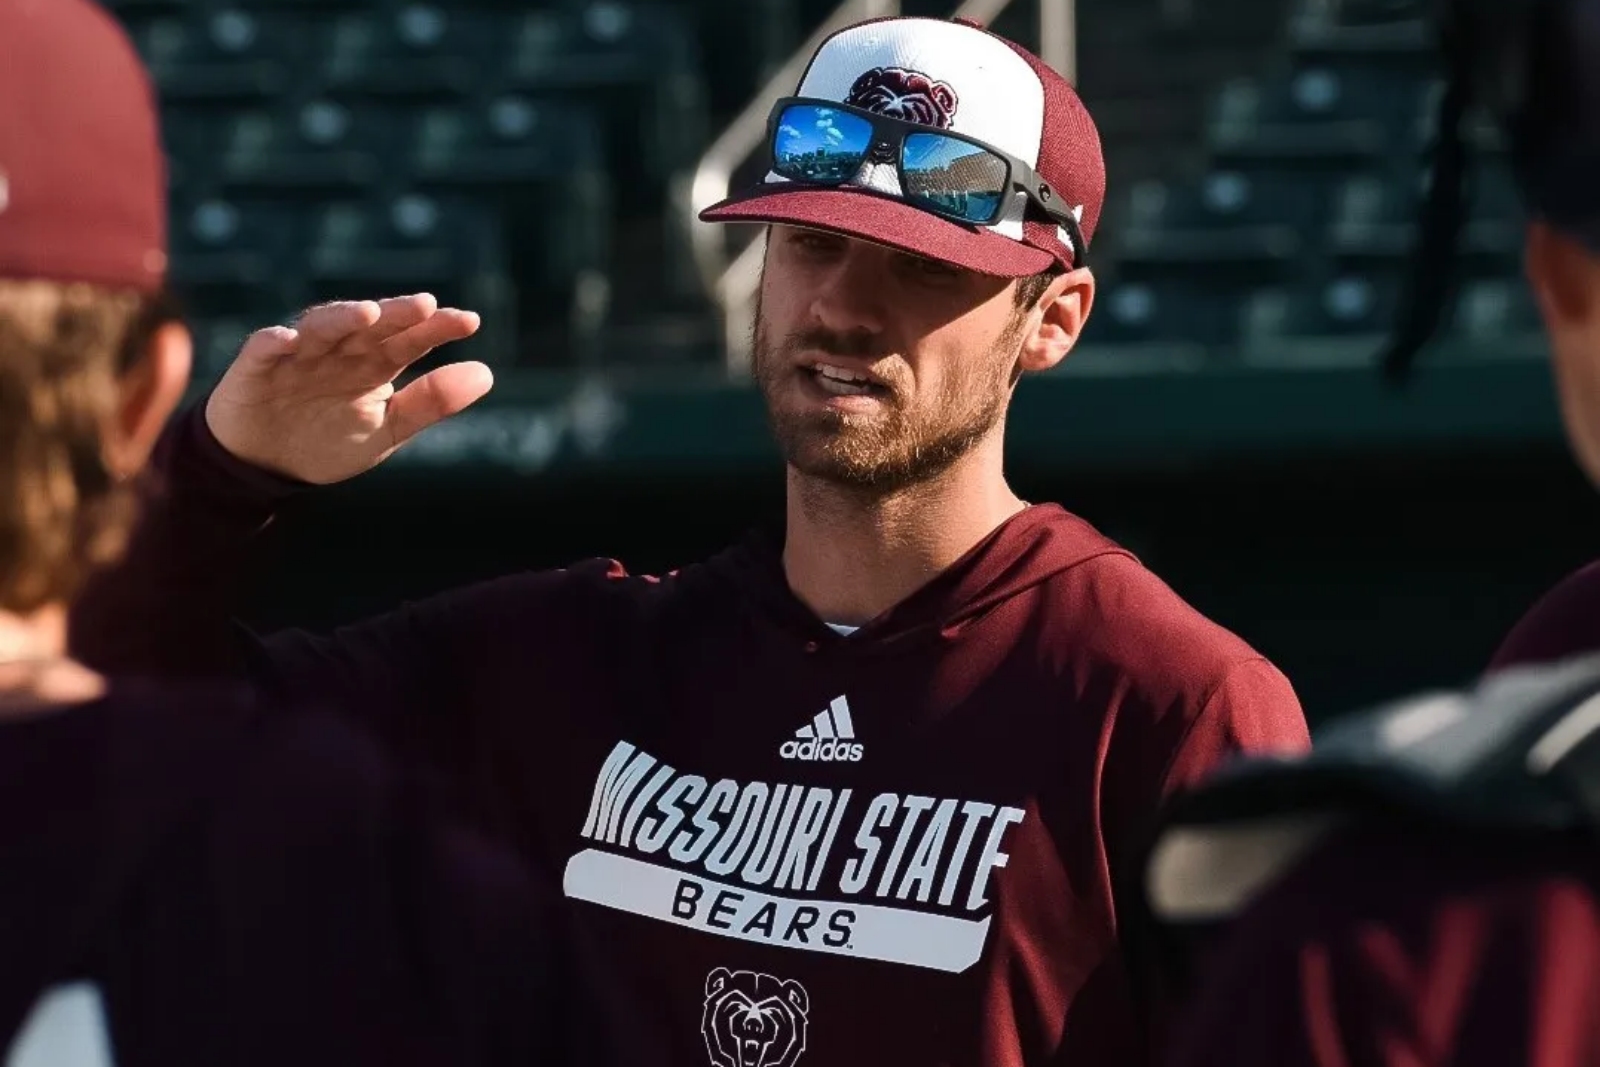 Missouri State baseball coach Joey Hawkins gives instructions to his players before a game at Hammons Field in Springfield, Missouri.